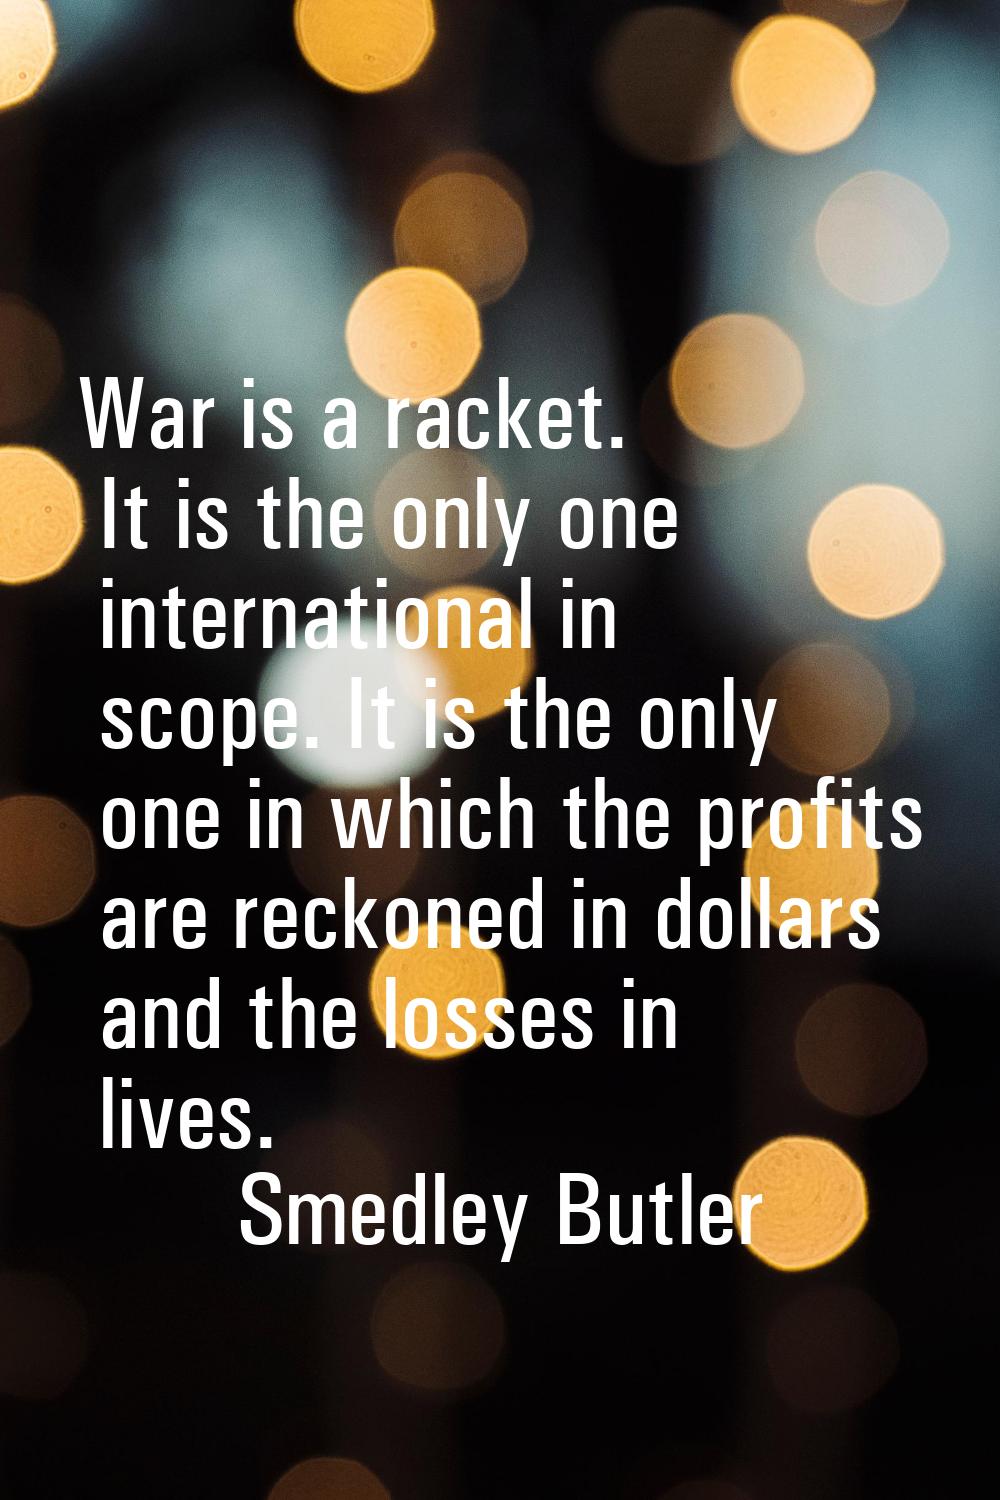 War is a racket. It is the only one international in scope. It is the only one in which the profits